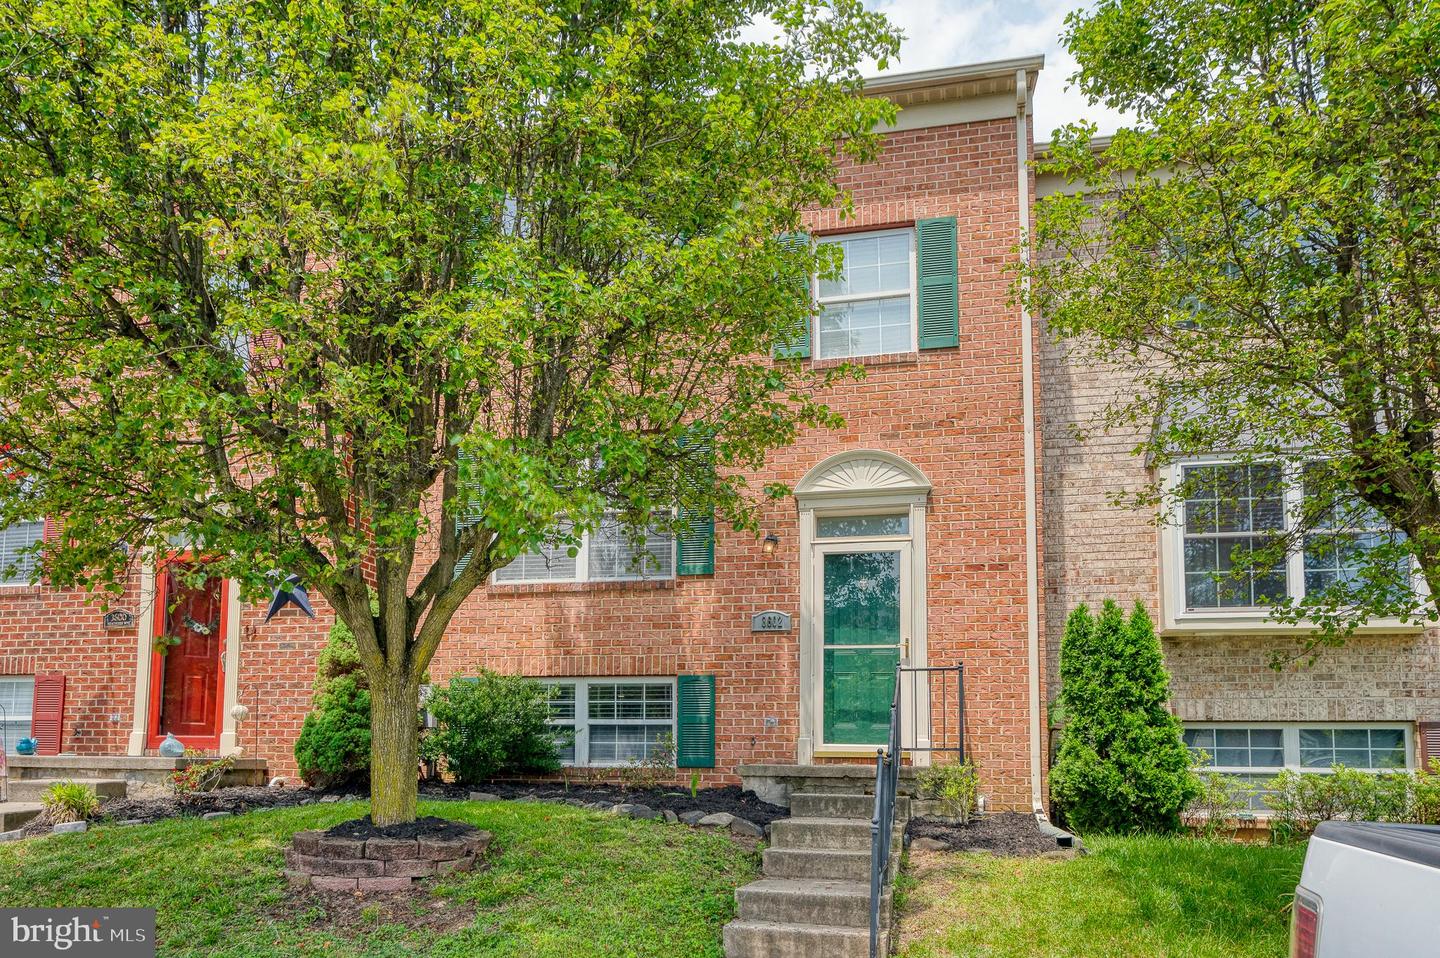 View Parkville, MD 21234 townhome